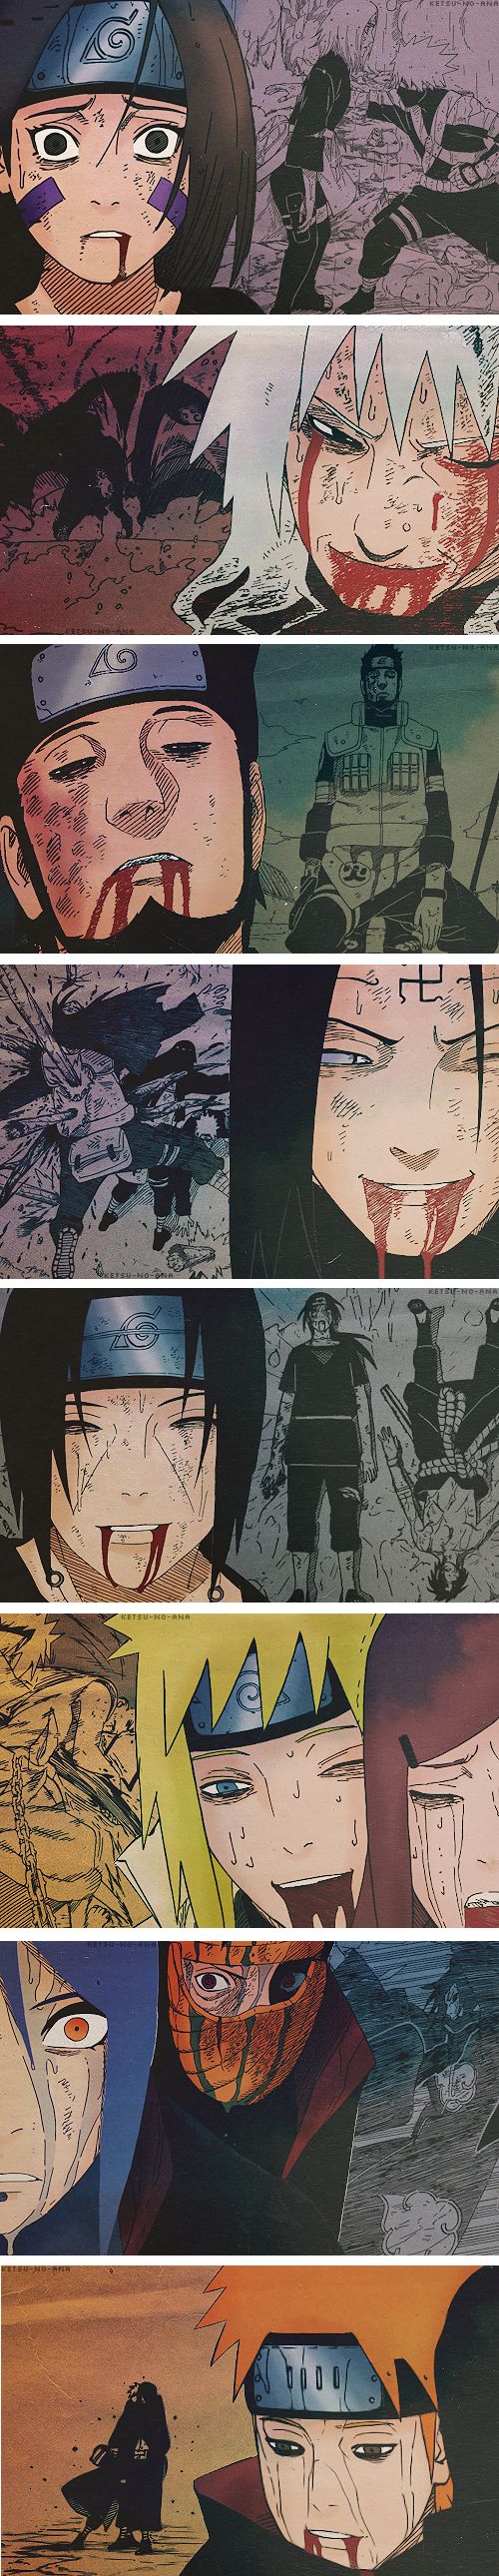 Deaths in Naruto. The many times my heart broke.